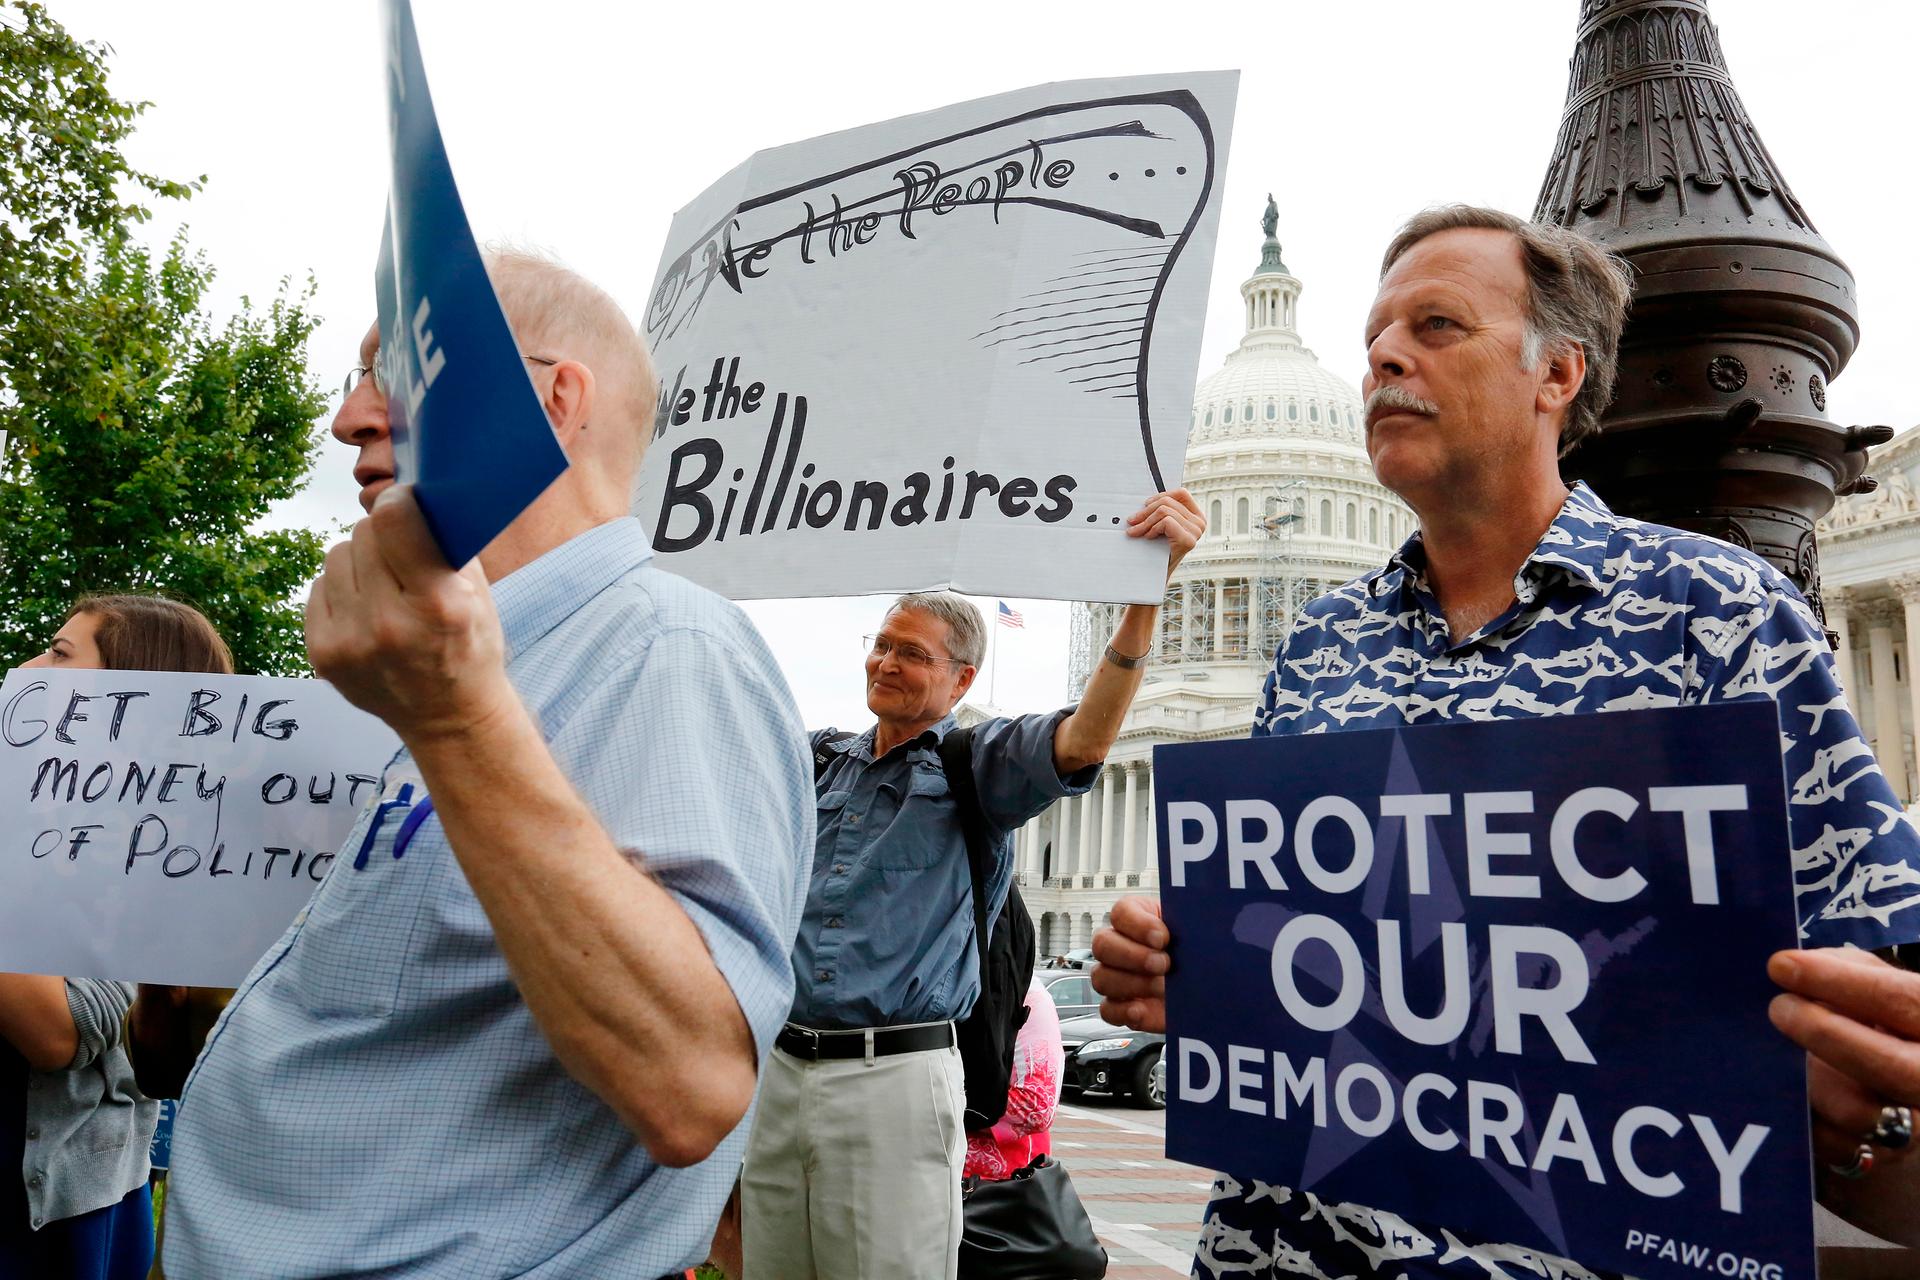 Supporters look on at a news conference on Capitol Hill led by Democratic senators and congressmen in support of a proposed constitutional amendment for campaign finance reform on September 8, 2014. 